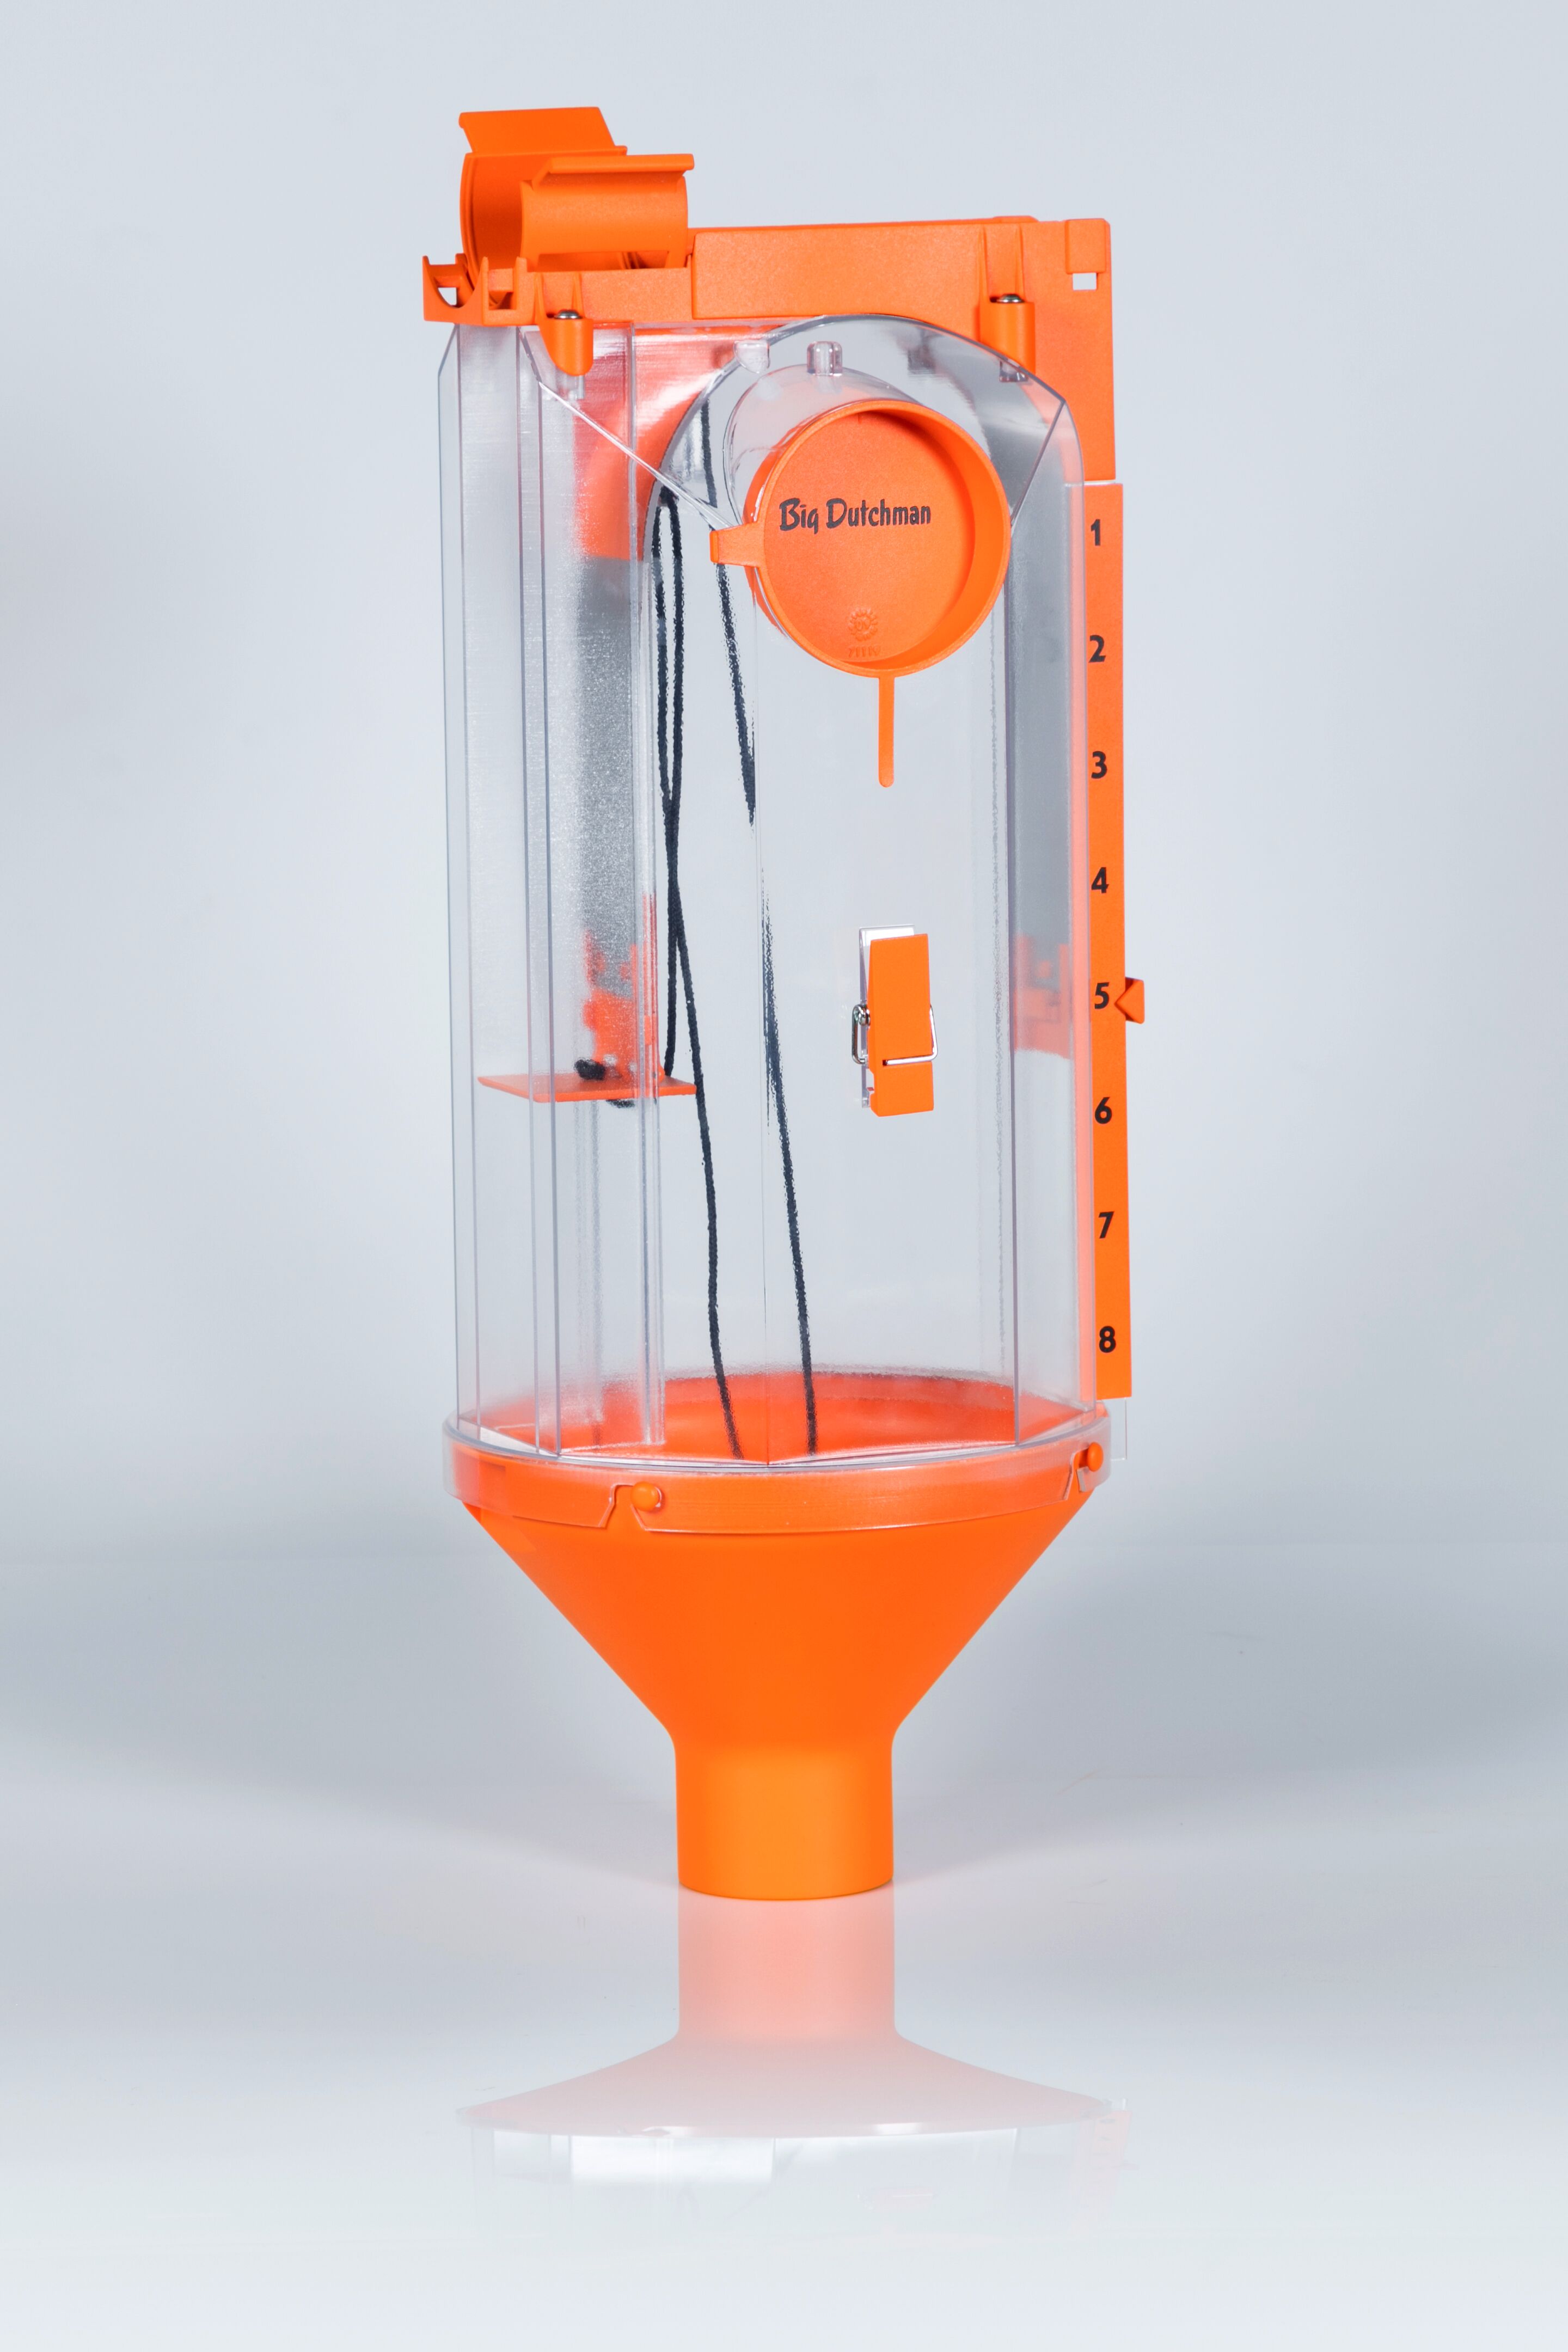 Big Dutchman offers a new volume dispenser, Vario 8L, which can dispense small portions – as little as 100g of feed – just as precisely as it can dispense larger rations of up to 5kg